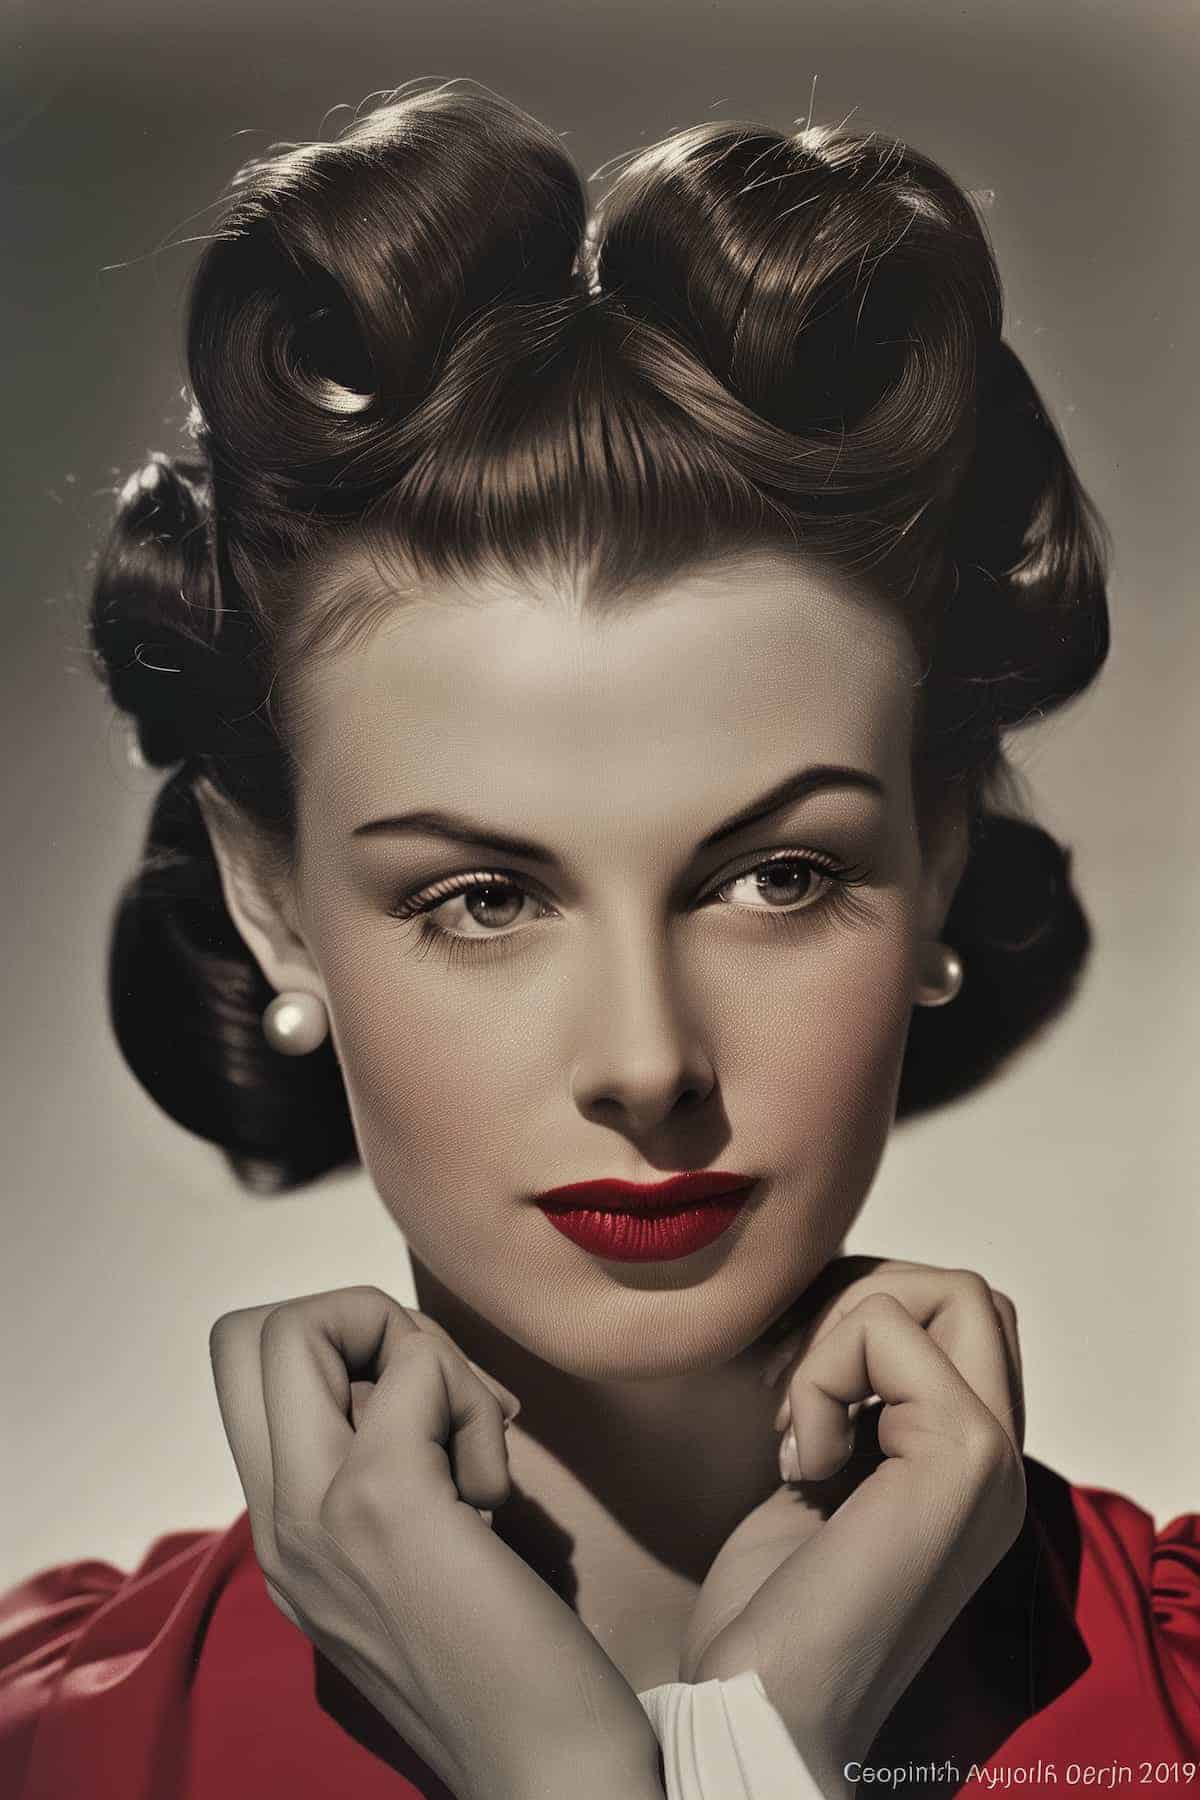 A woman with vintage 1940s hairstyle, red lipstick, and pearl earrings poses with hands near her face, wearing a red top.